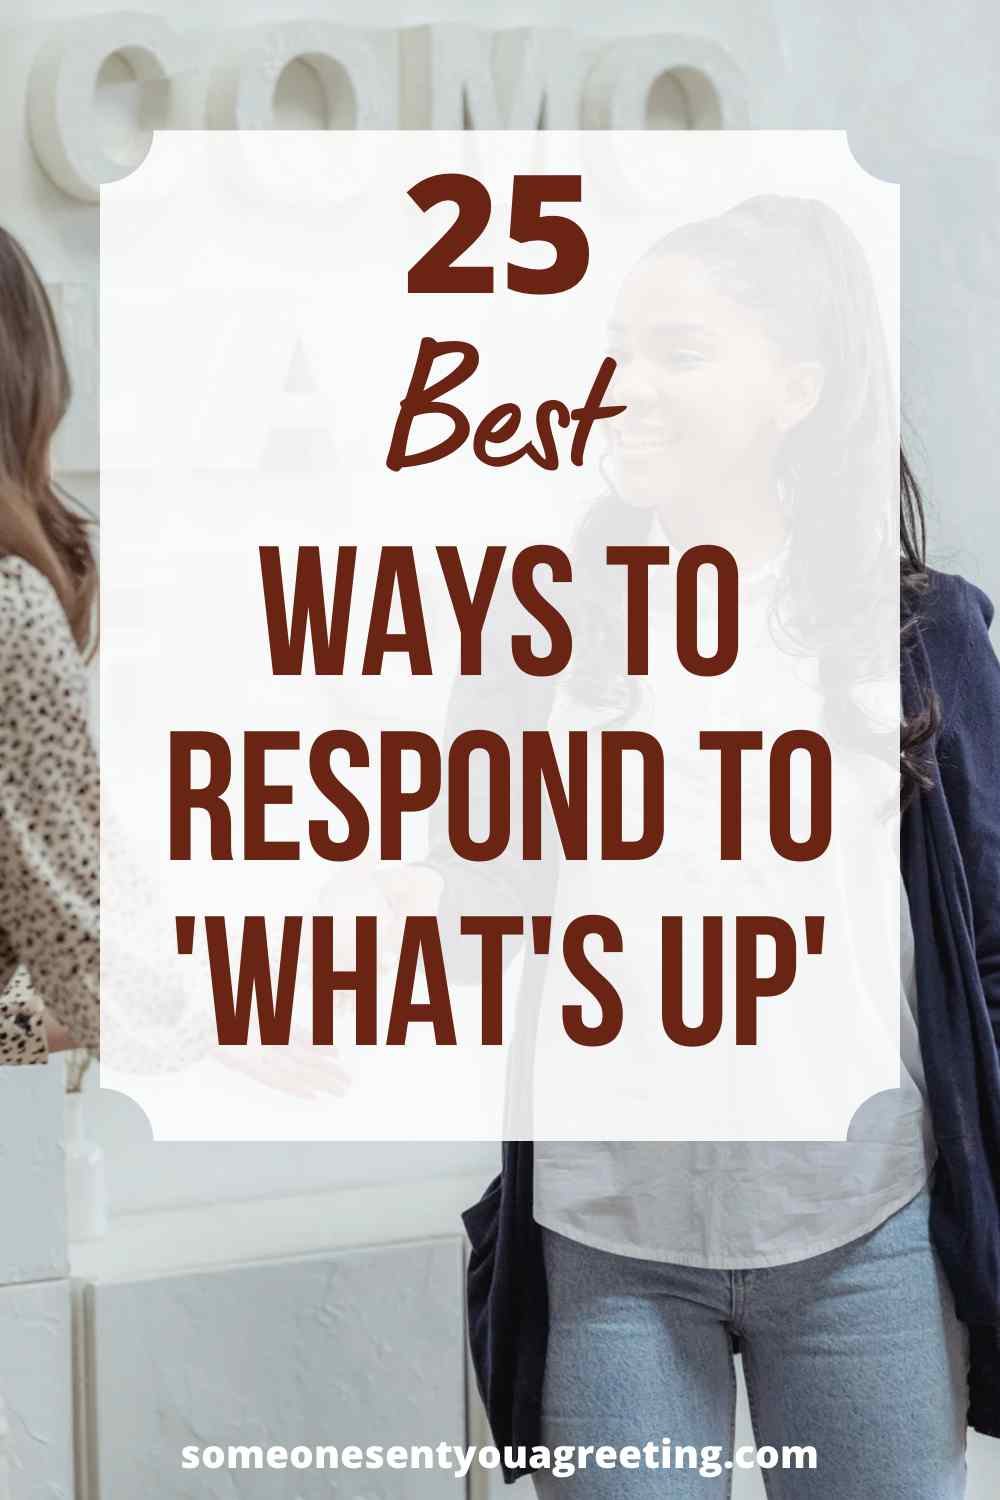 ways to respond to whats up